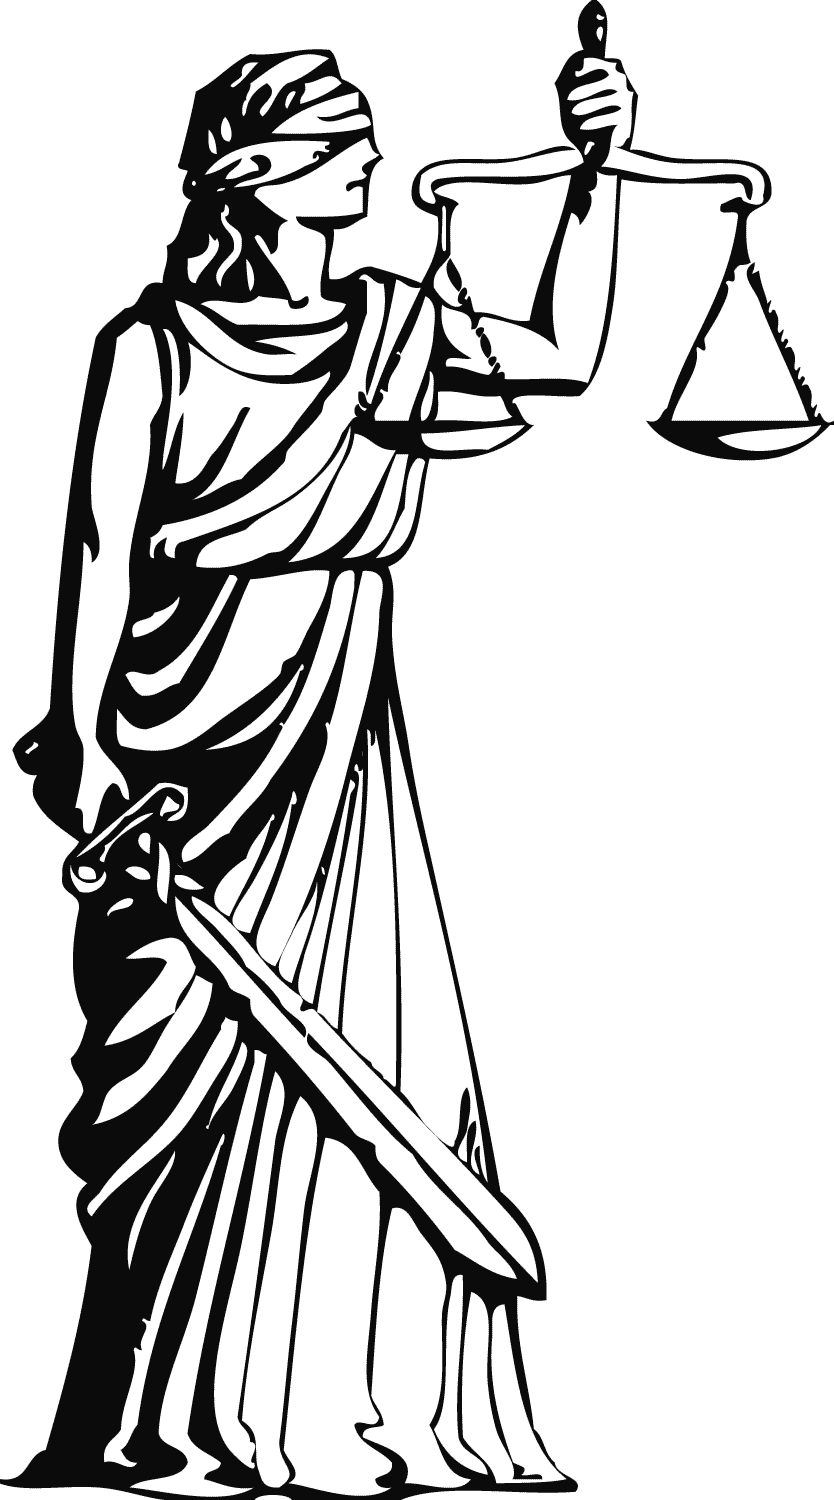 Law clipart legal right. Why not get judgement